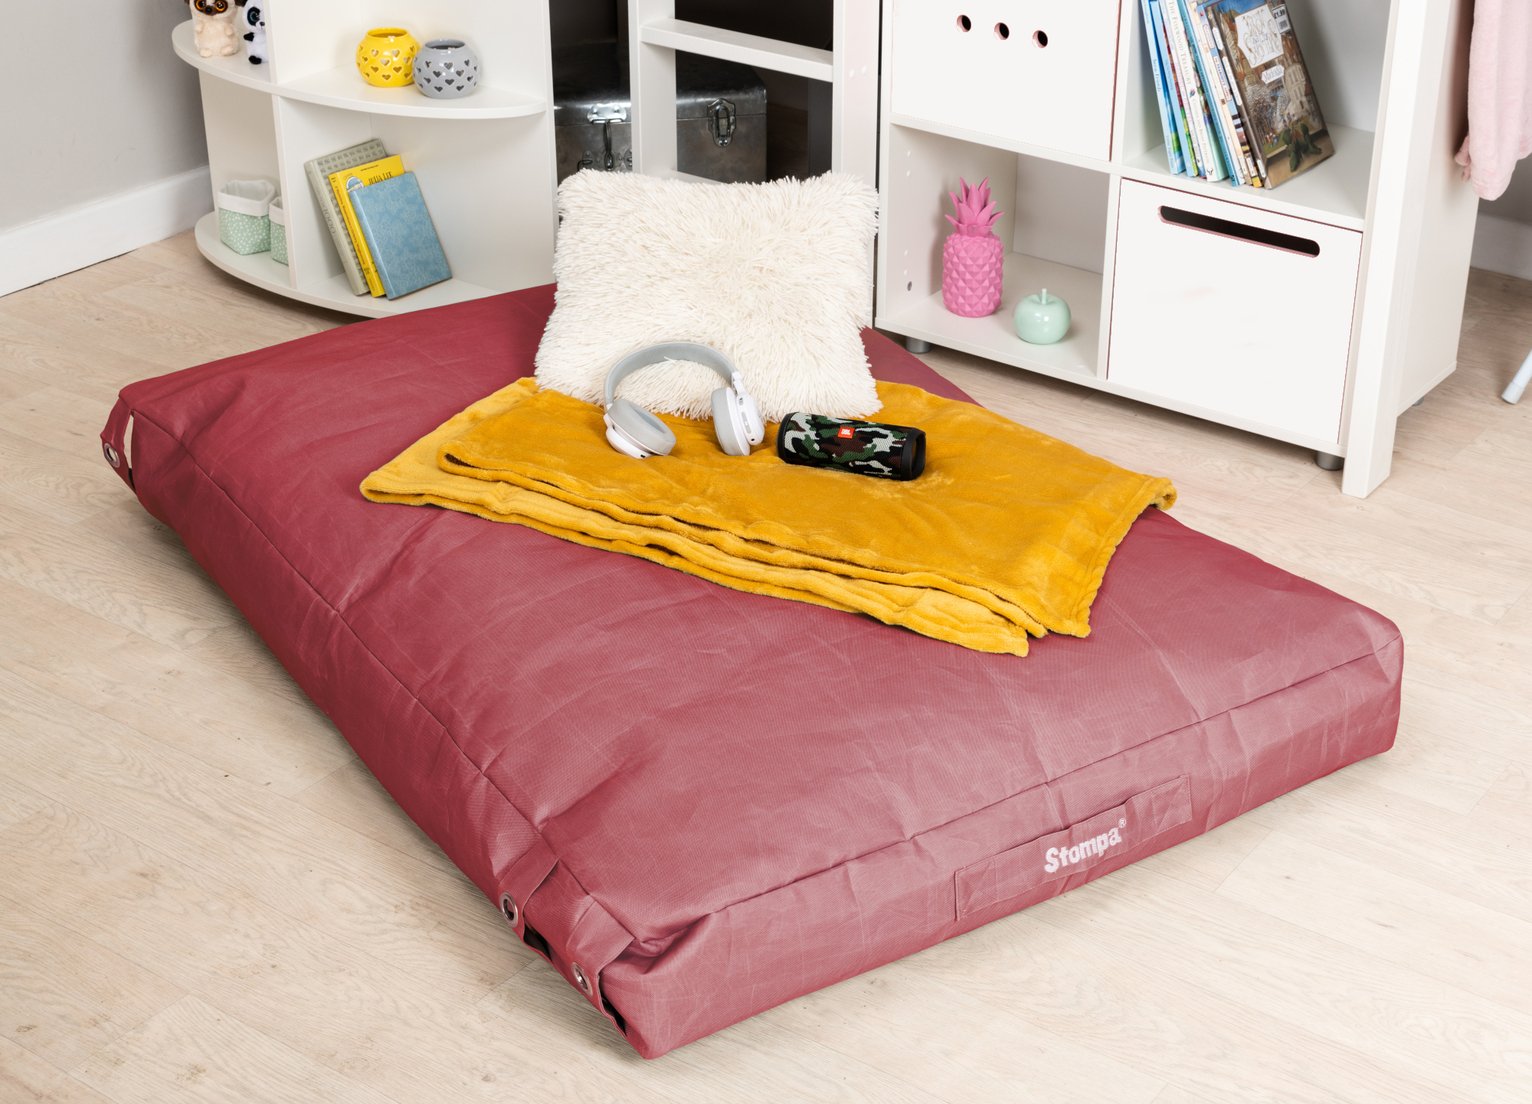 Stompa Buckle Lounger Beanbag - Pink